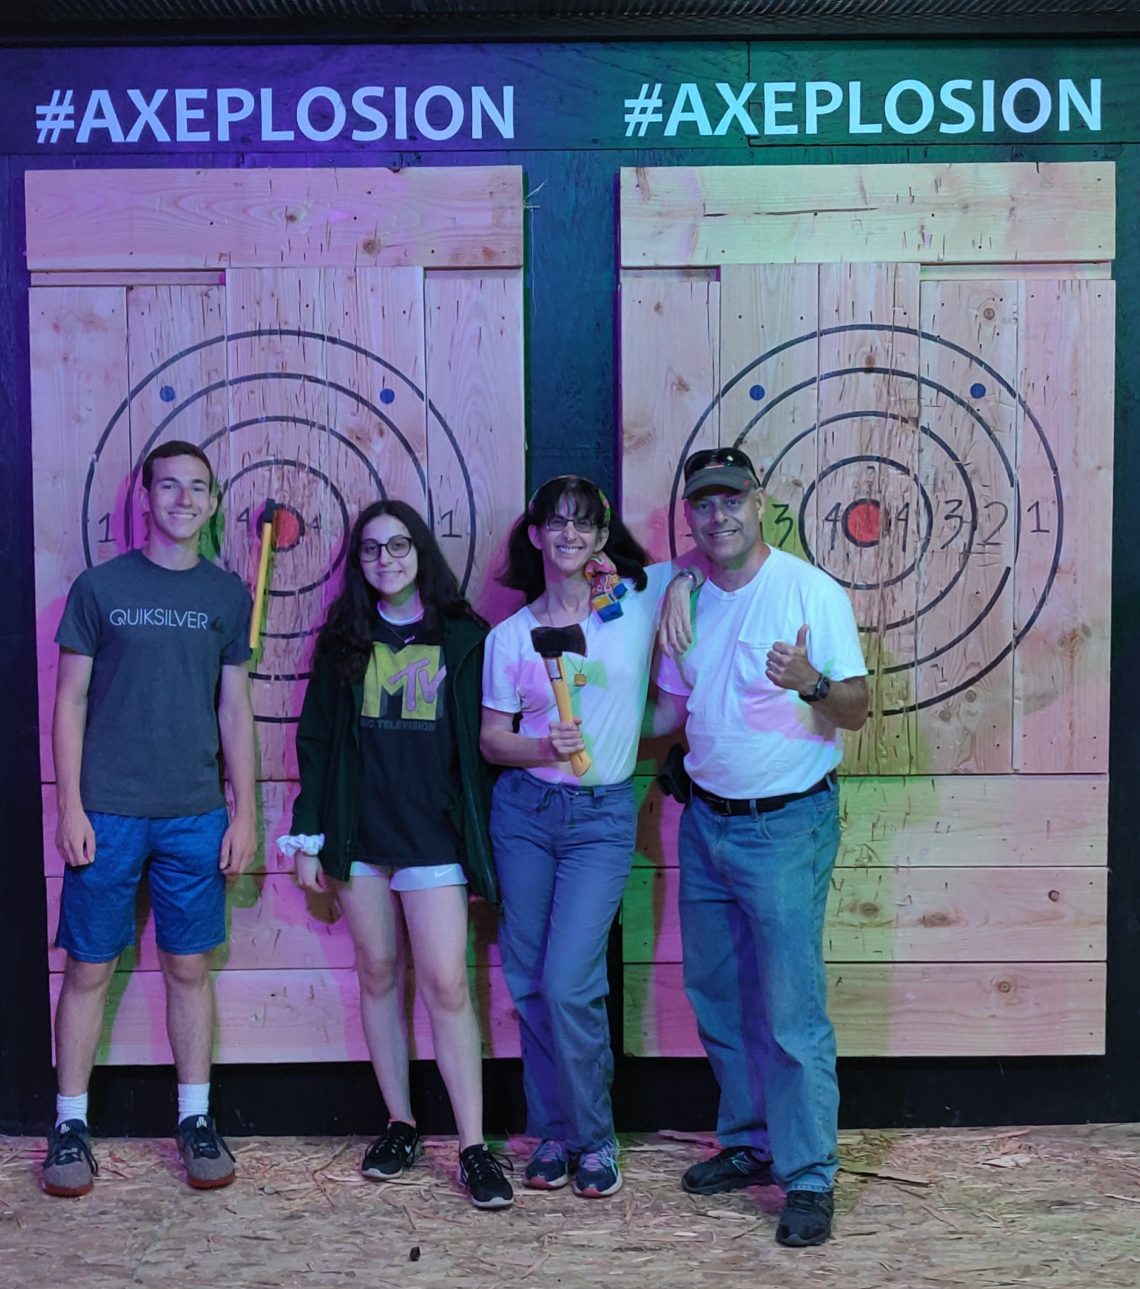 All smiles after our axe throwing adventure!